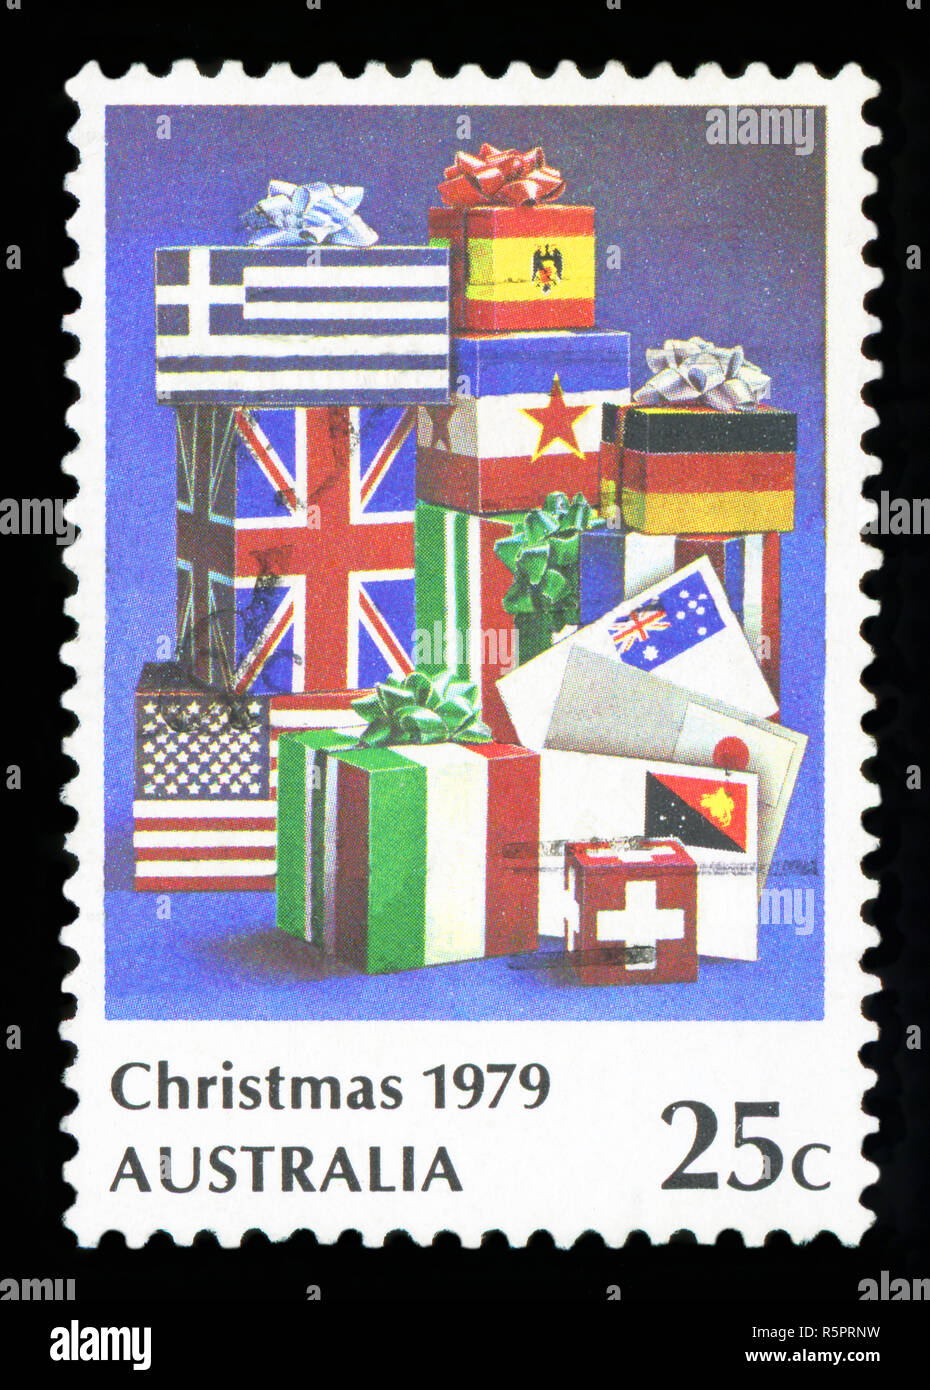 AUSTRALIA - CIRCA 1979: a stamp printed in the Australia shows Christmas Letters and Flag-wrapped Parcels, Christmas, circa 1979 Stock Photo